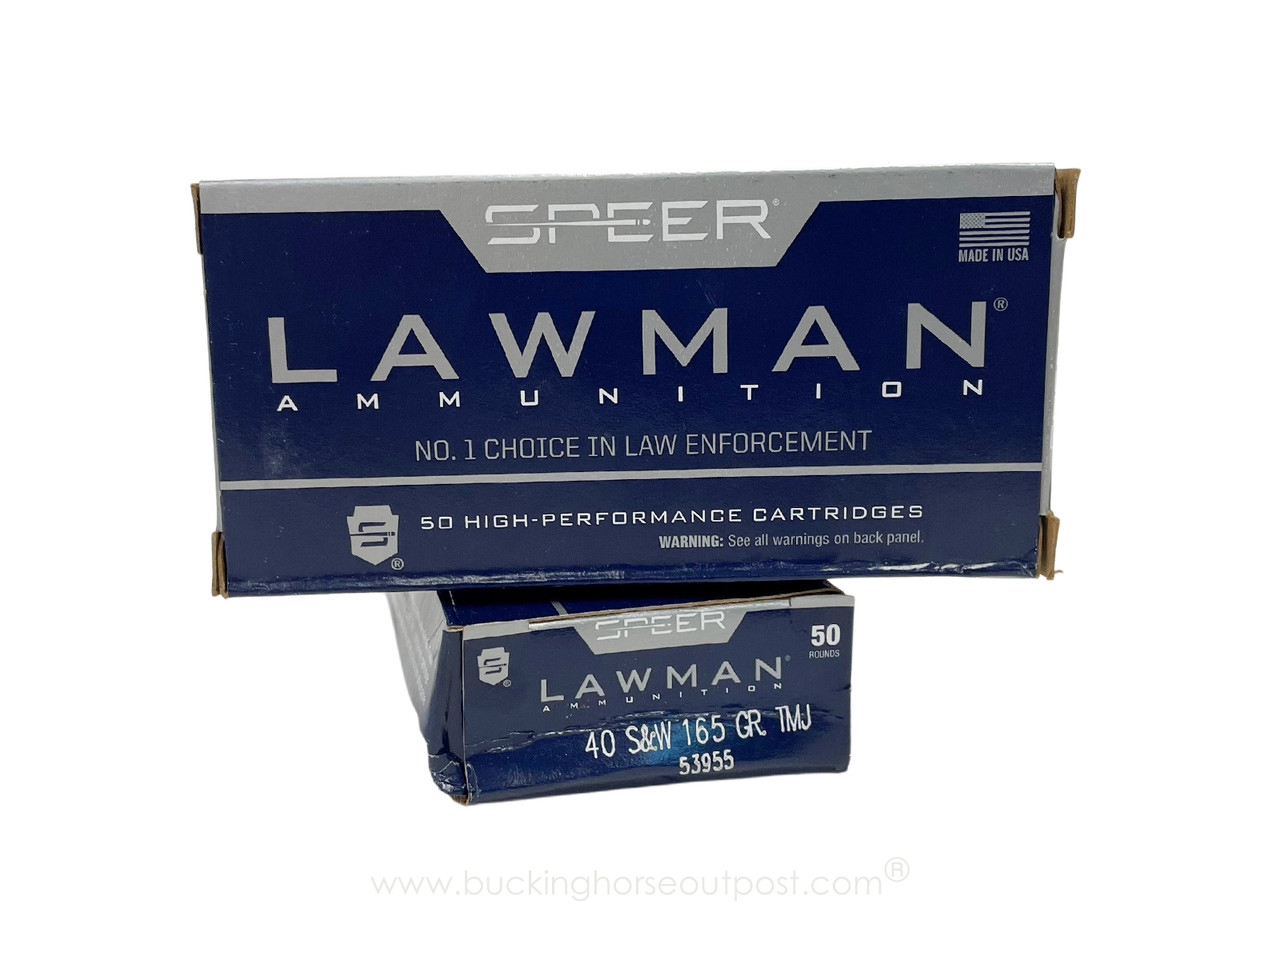 Speer Lawman .40 S&W 165 Grain Total Metal Jacket 50rds Per Box (53955) - Police Trade In 50rds Per Box - FREE SHIPPING ON ORDERS OVER $175